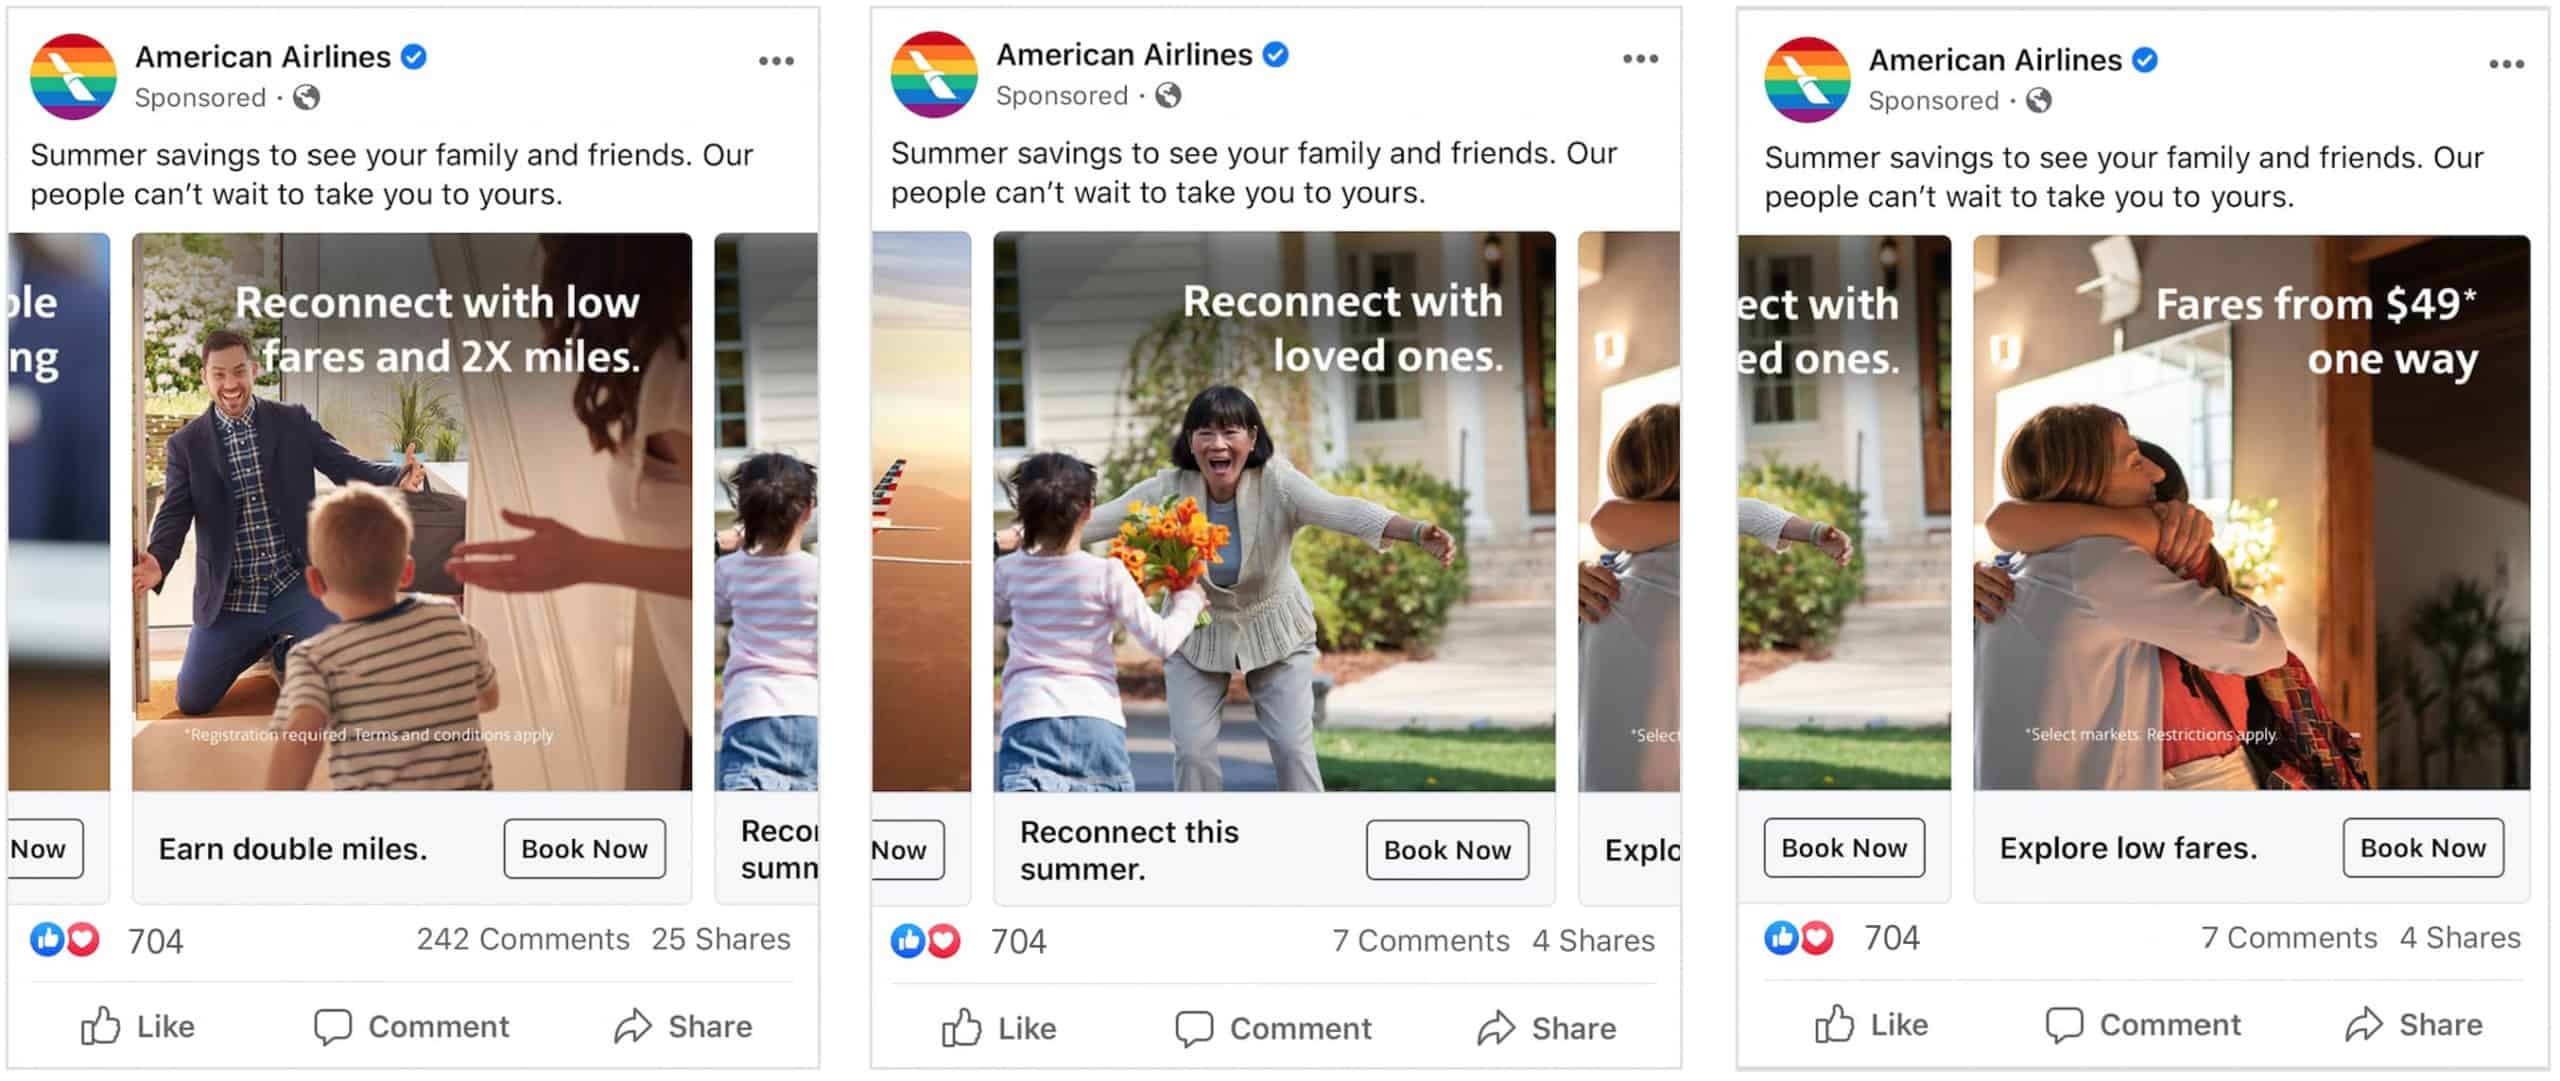 American Airlines Summer of Deals Facebook promotion